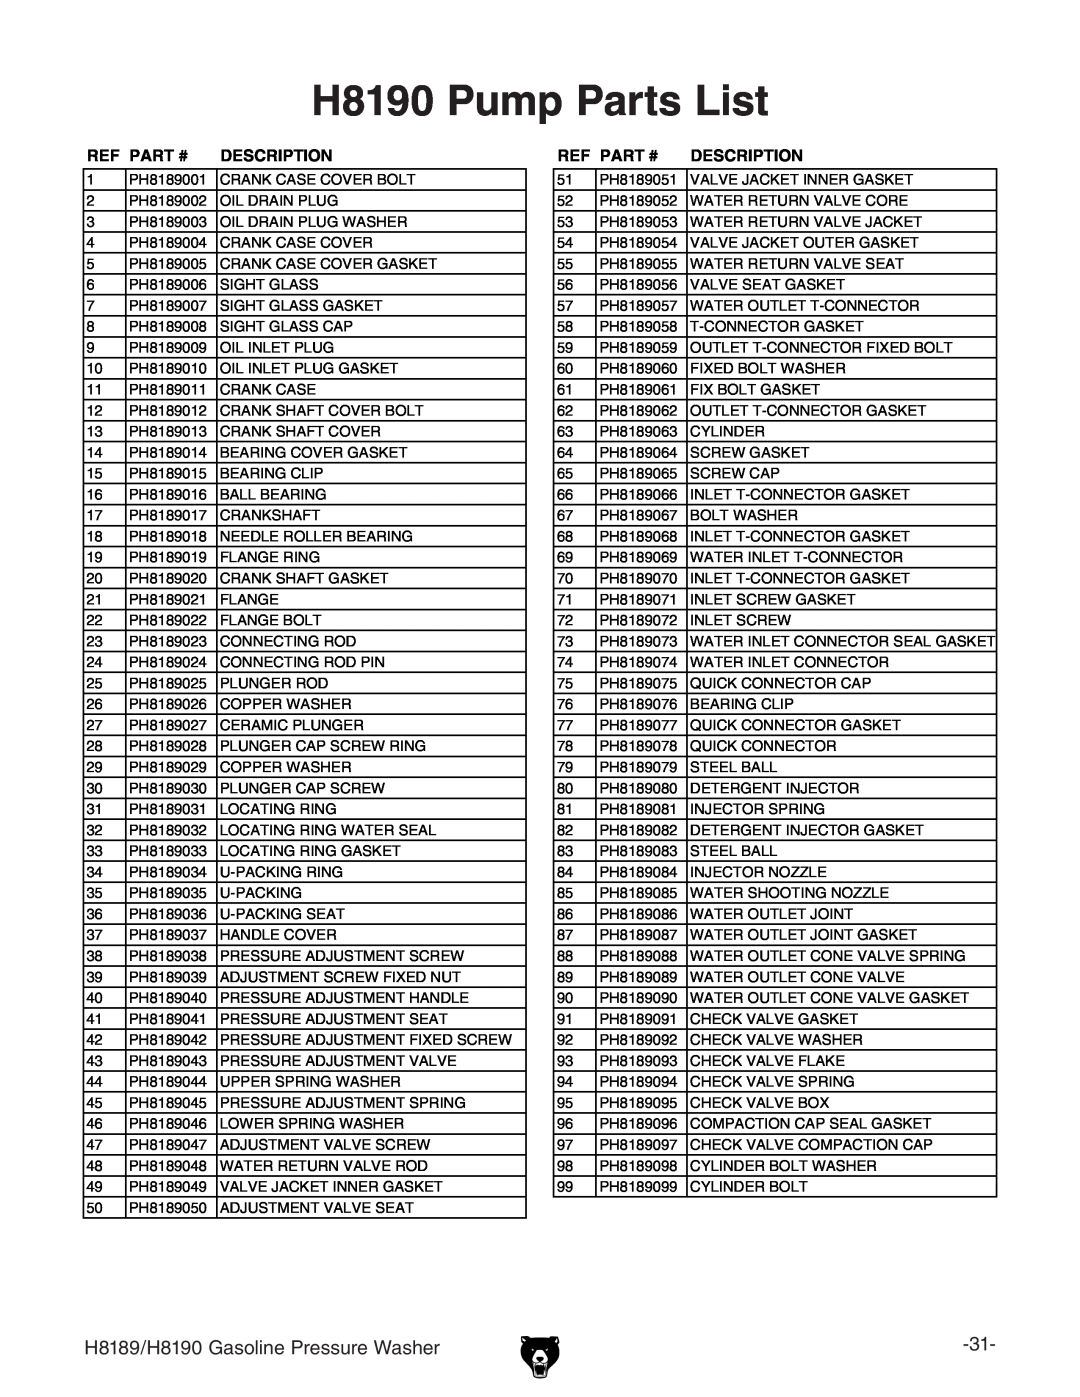 Grizzly owner manual H8190 Pump Parts List, H8189/H8190 Gasoline Pressure Washer 